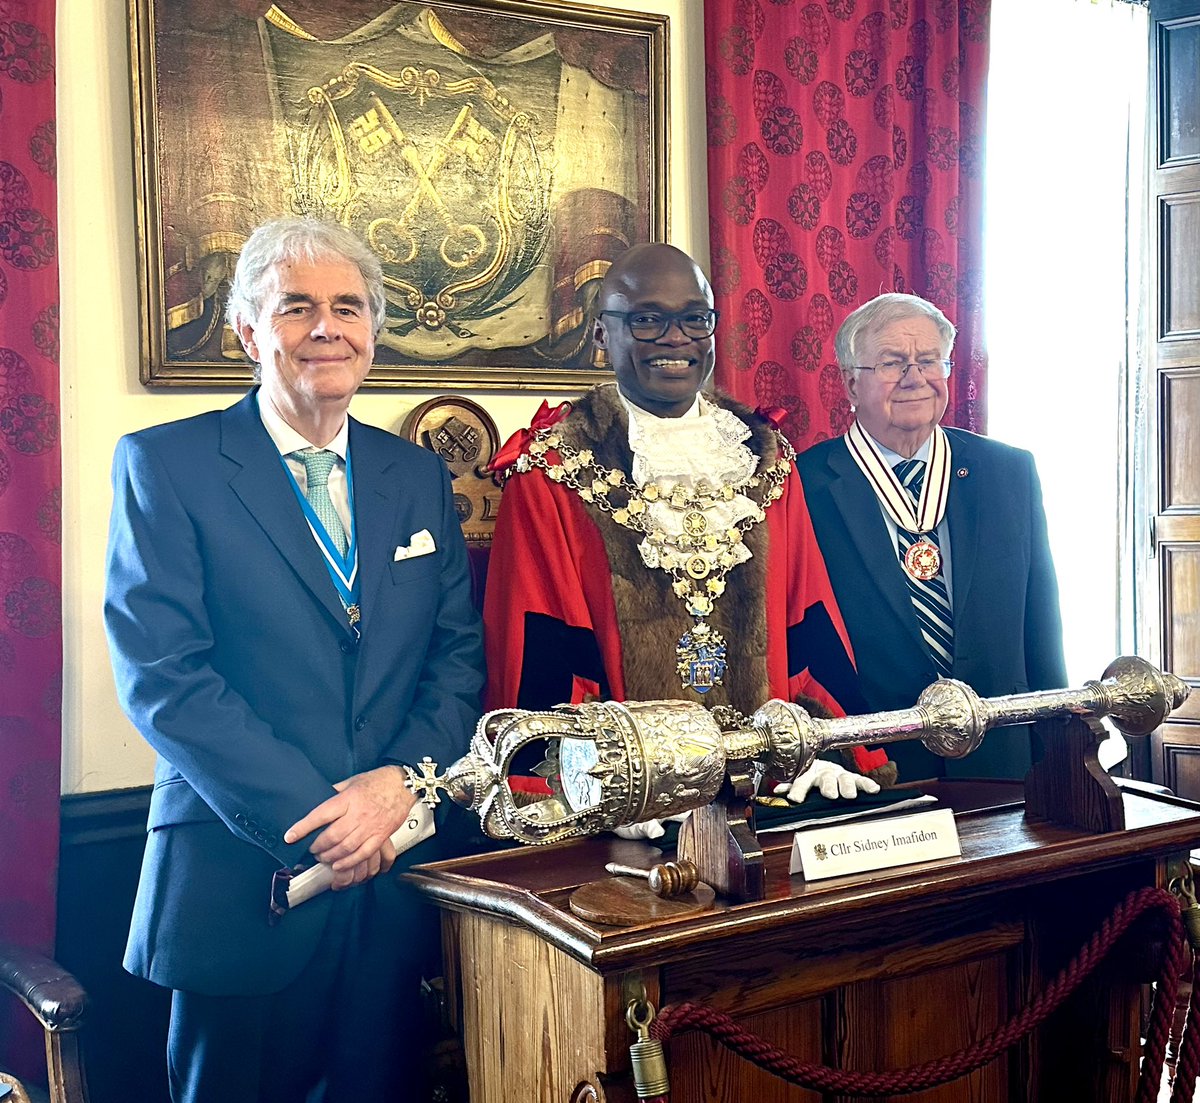 Thank you to @markknight1955 for
representing me as Cllr Sidney IMAFIDON was installed as Mayor of
Wisbech @WisbechCouncil 
The Chamber was full with Councillors, family, friends, the Mayor of Whittlesey & @HSheriffCambs .
We all wish Sidney a brilliant year in office.